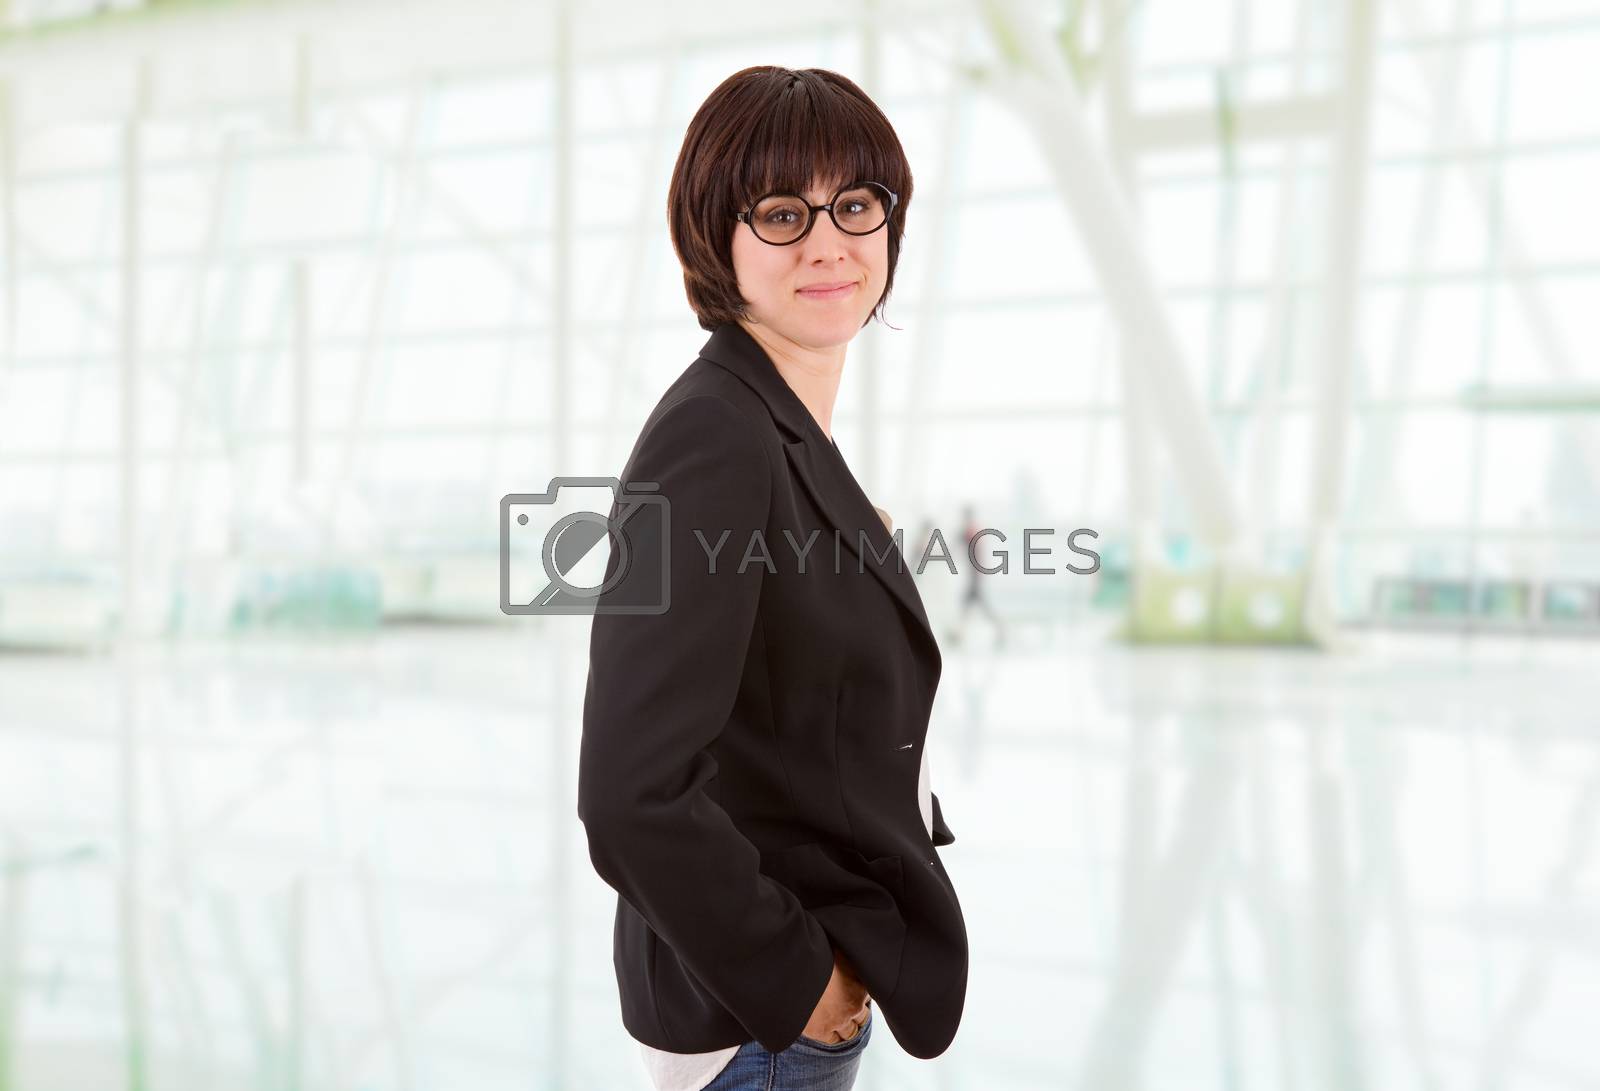 Royalty free image of business woman by zittto